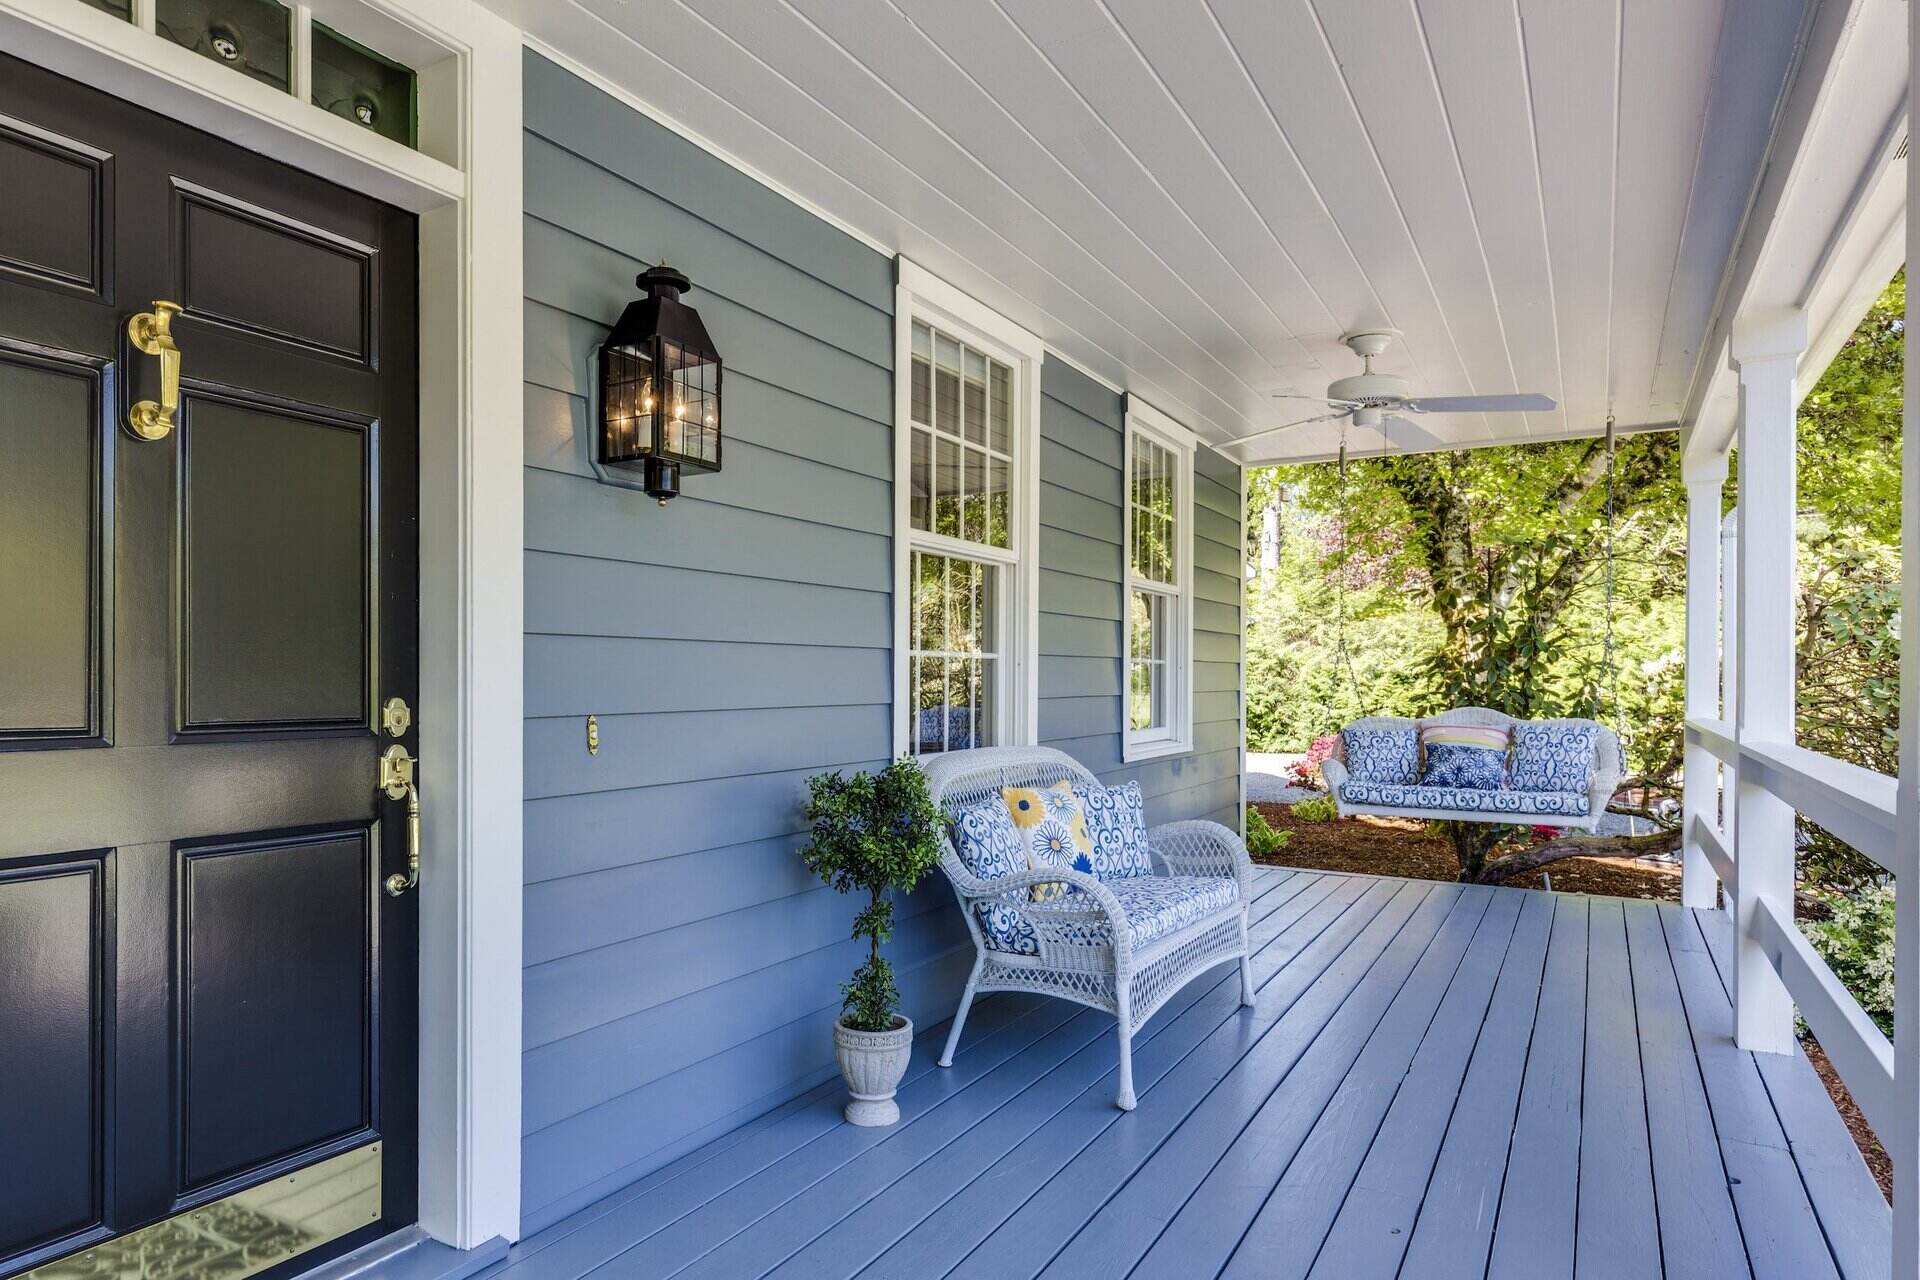 How To Clean Painted Wood Porch